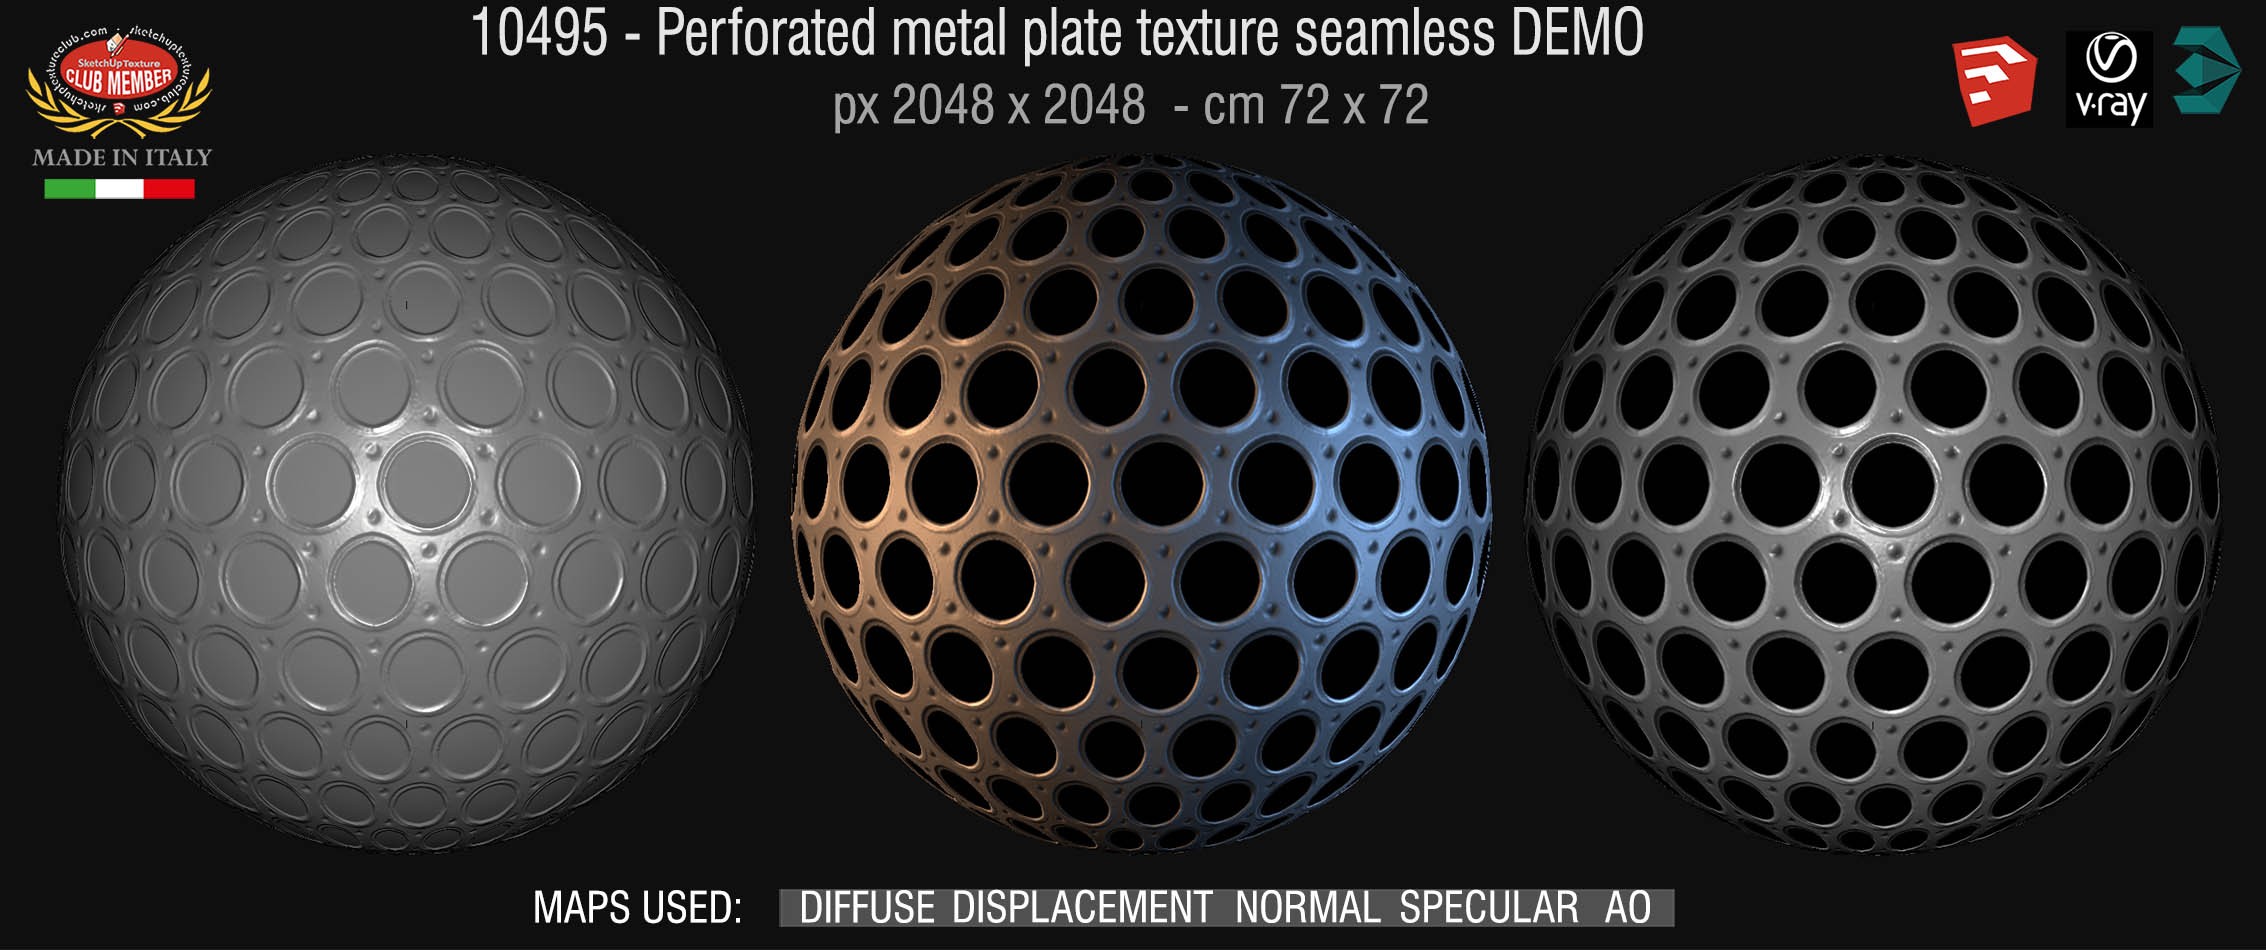 10495 HR Perforated metal plate texture seamless + maps DEMO